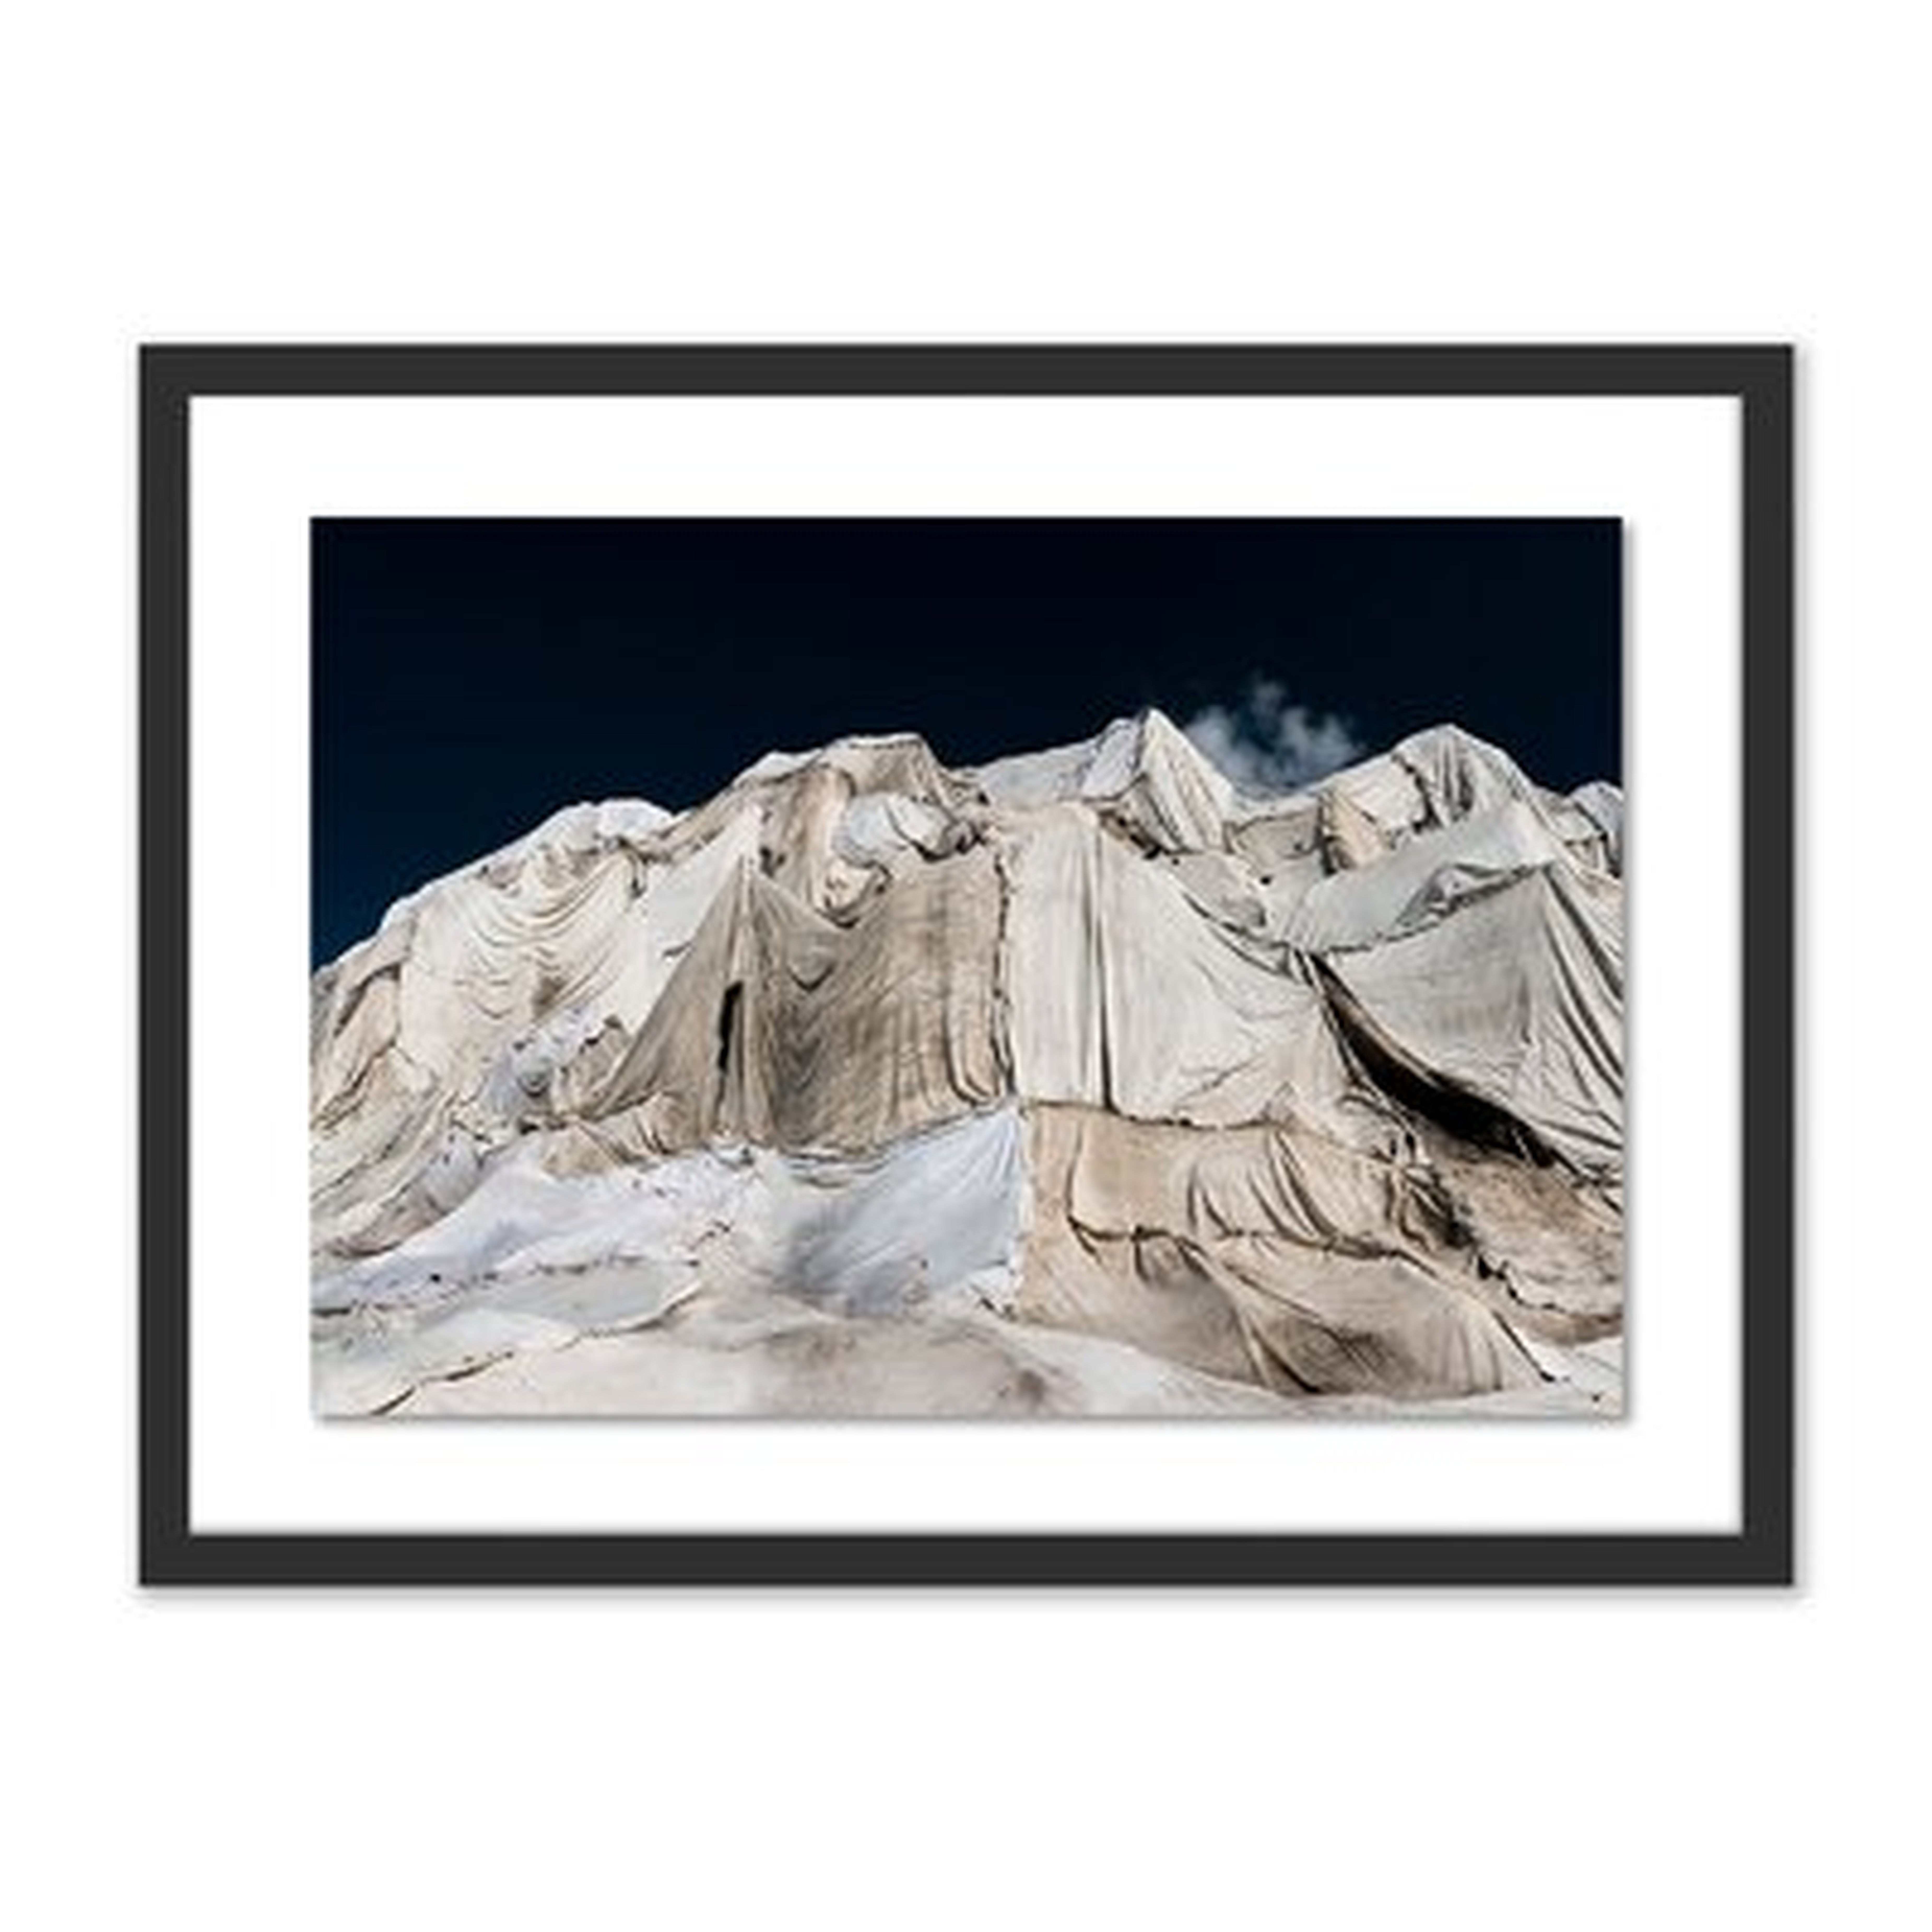 'Behind the Cold Veil II' by Michael Schauer - Picture Frame Photograph Print on Paper - Wayfair